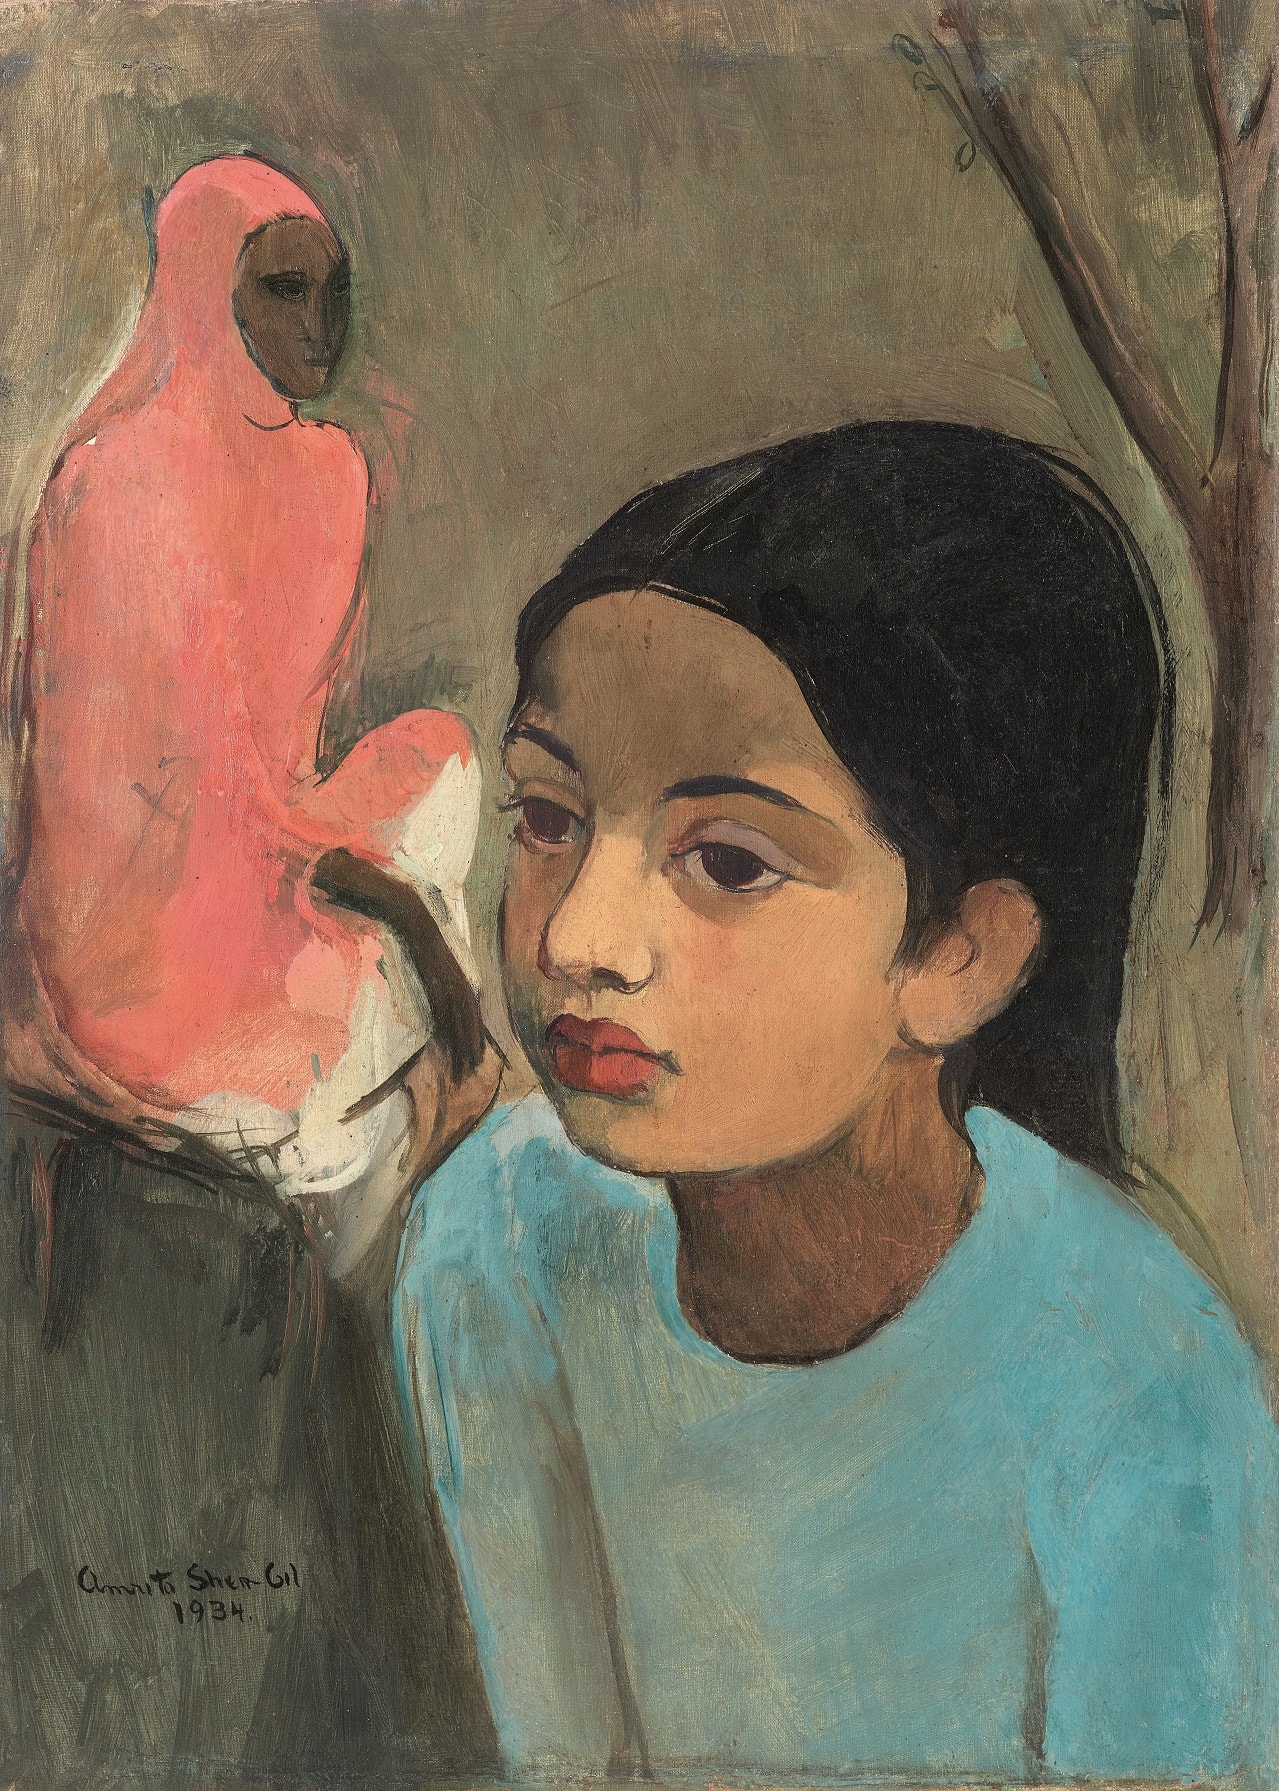 Lot 12, Sher-Gil, The Little Girl in Blue (1934), INR 8,50,00,000-12,50,00,000-min